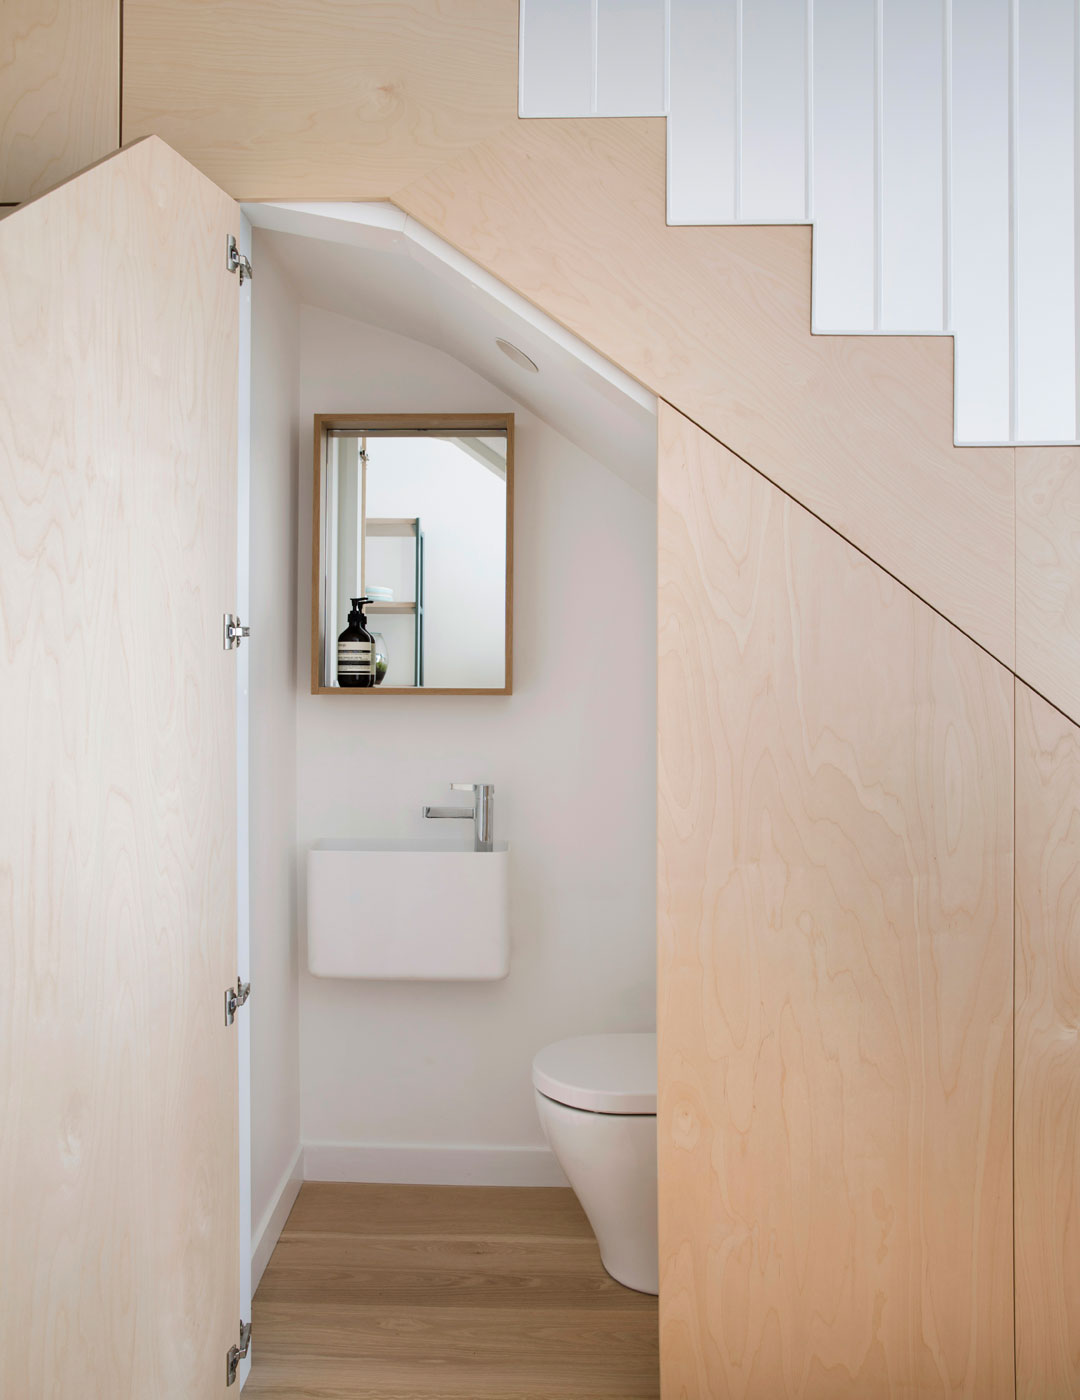 pgr projects contemporary interior renovation concealed toilet